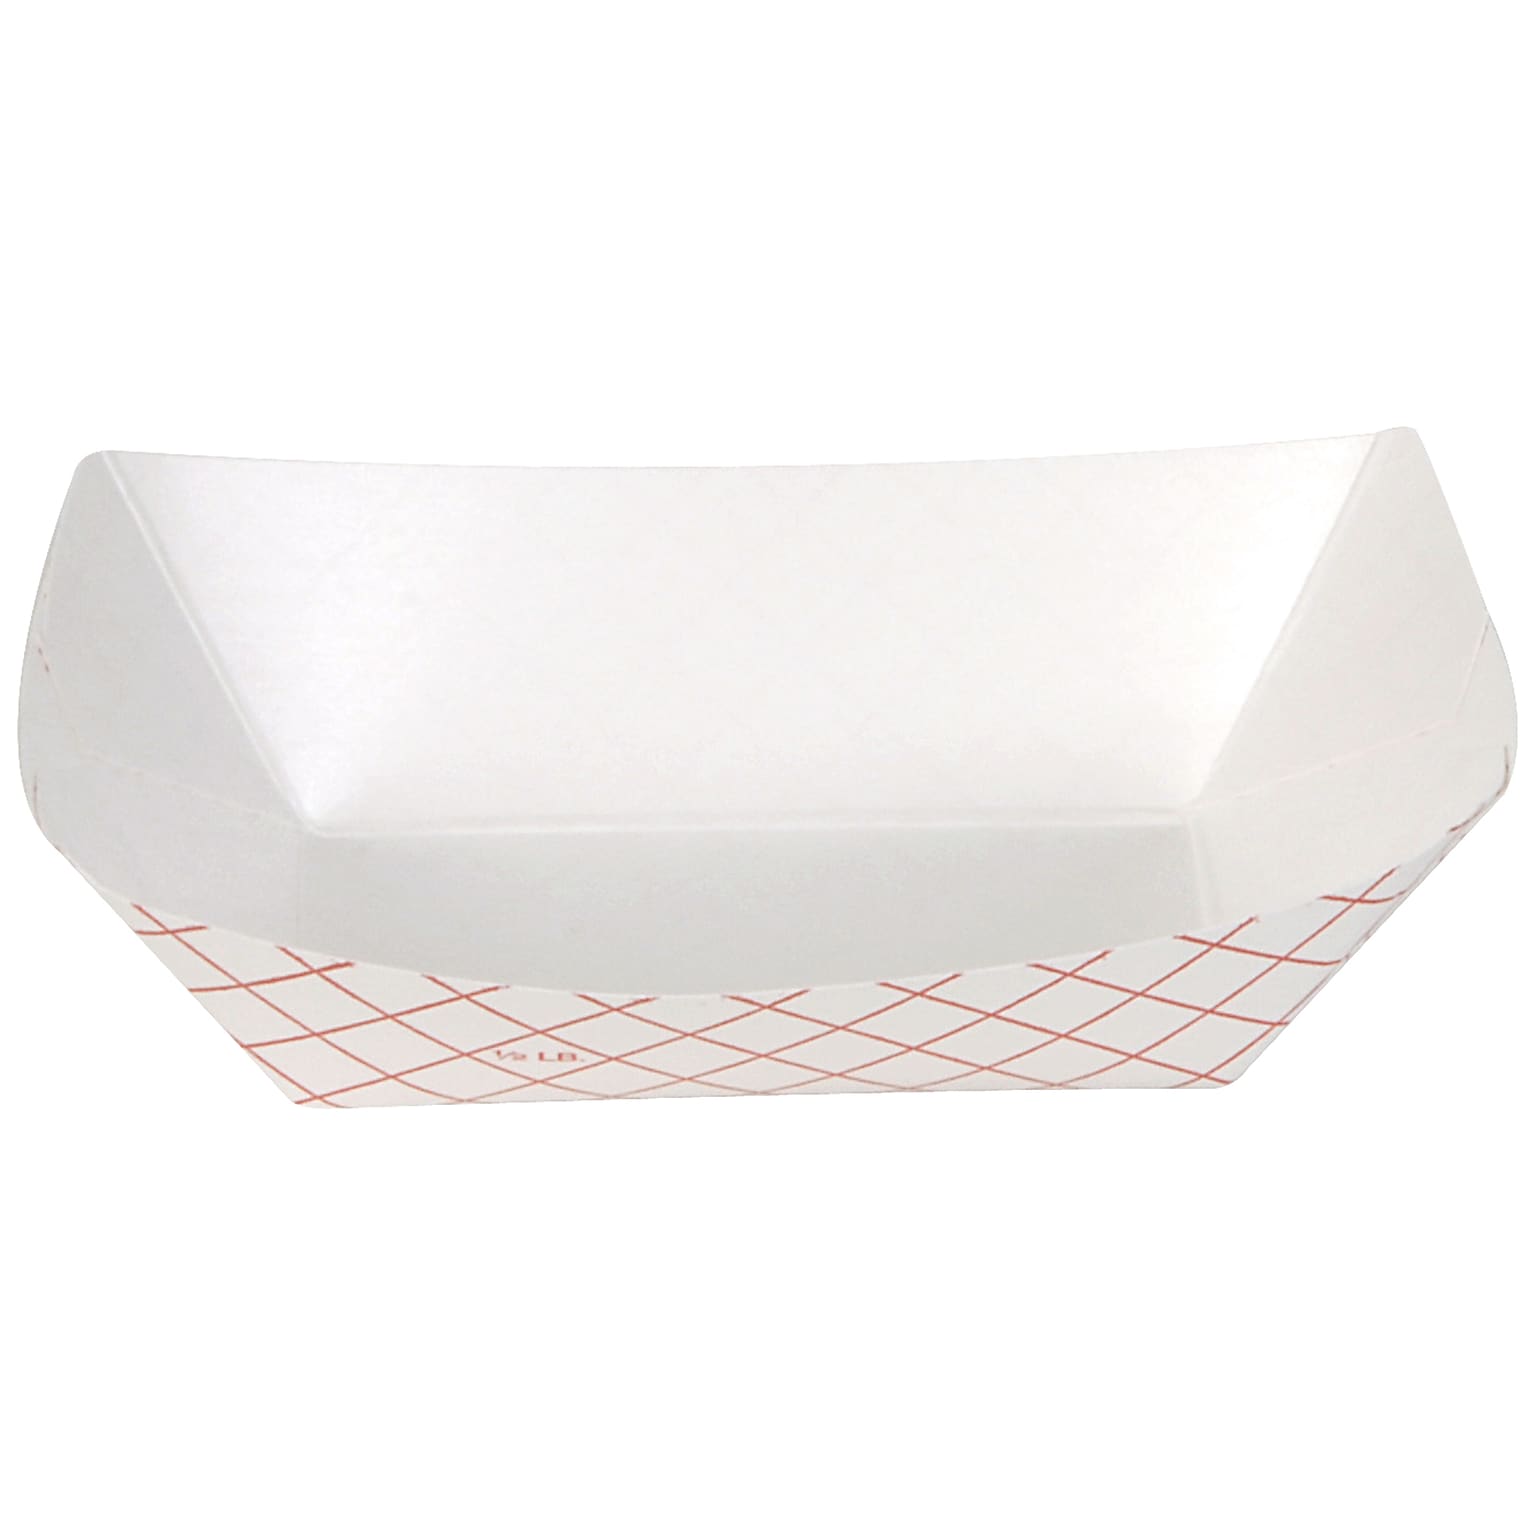 Dixie Products Kant Leek Red Plaid.5 lb. Poly Coated Food Tray, 4 Packs/250 Trays, 1000 Trays/CS